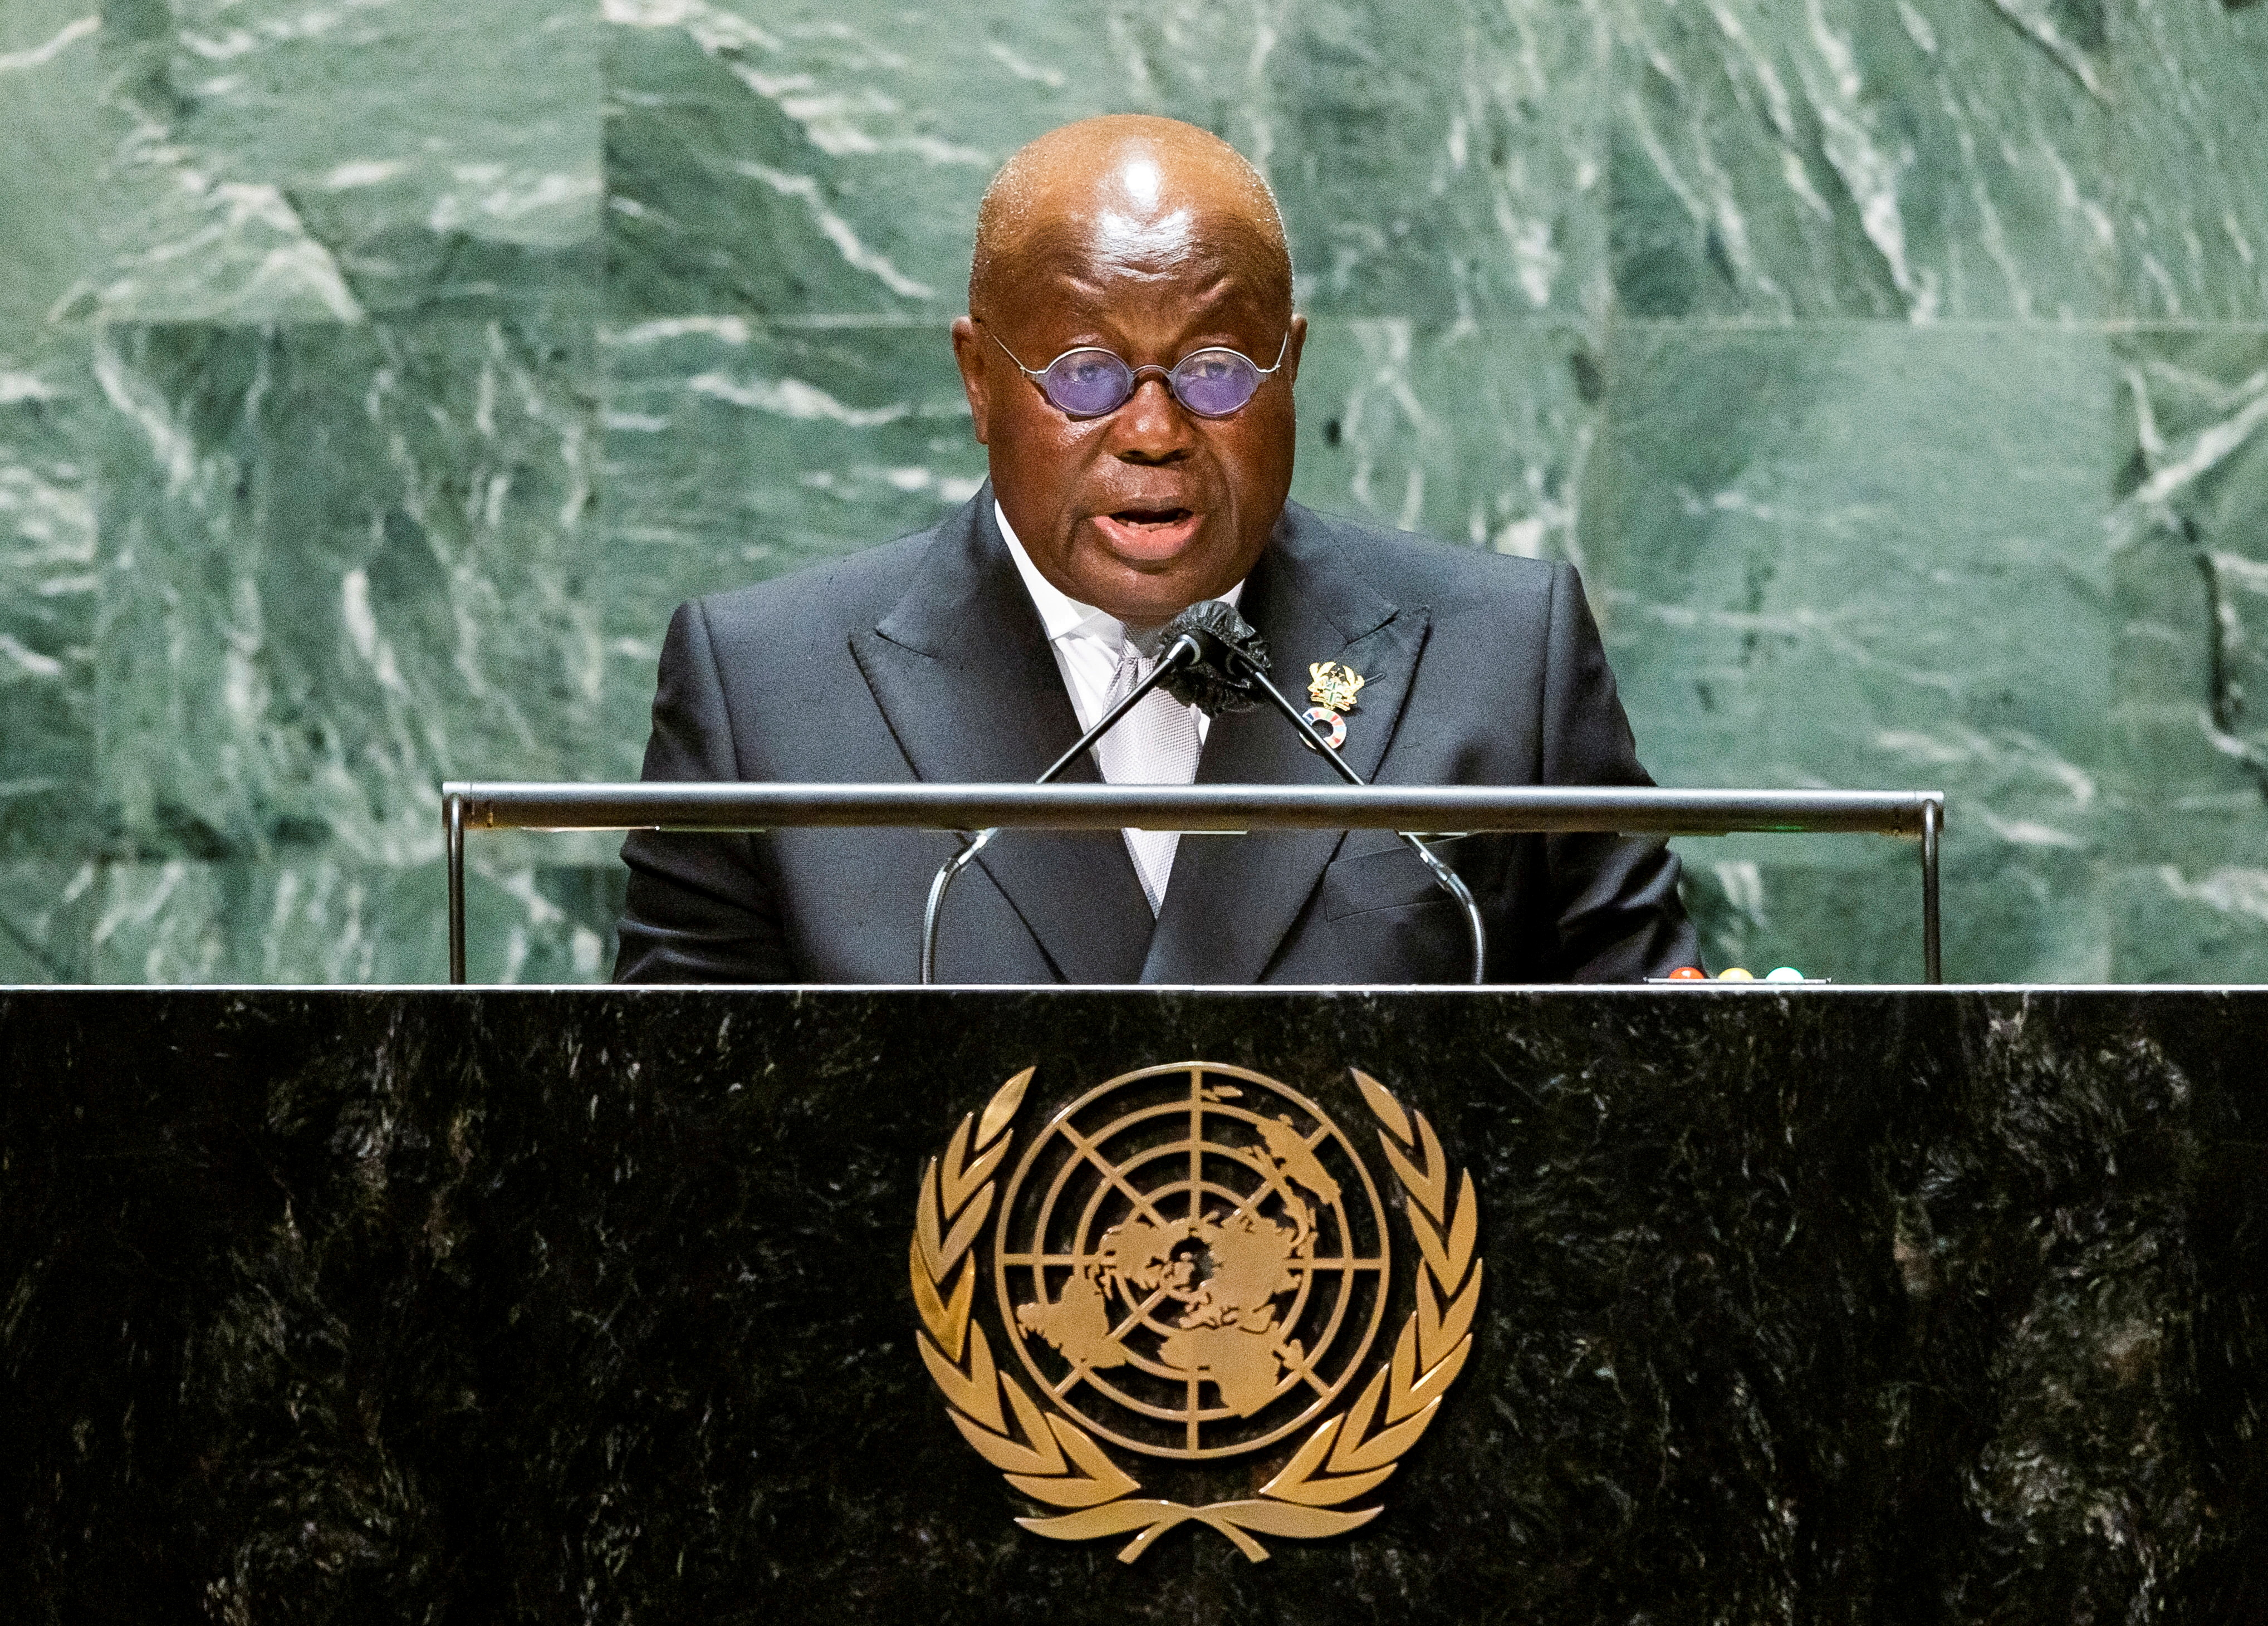 Ghana’s President Nana Addo Dankwa Akufo-Addo addresses the General Debate of the 76th Session of the United Nations General Assembly in New York City, U.S., September 22, 2021.